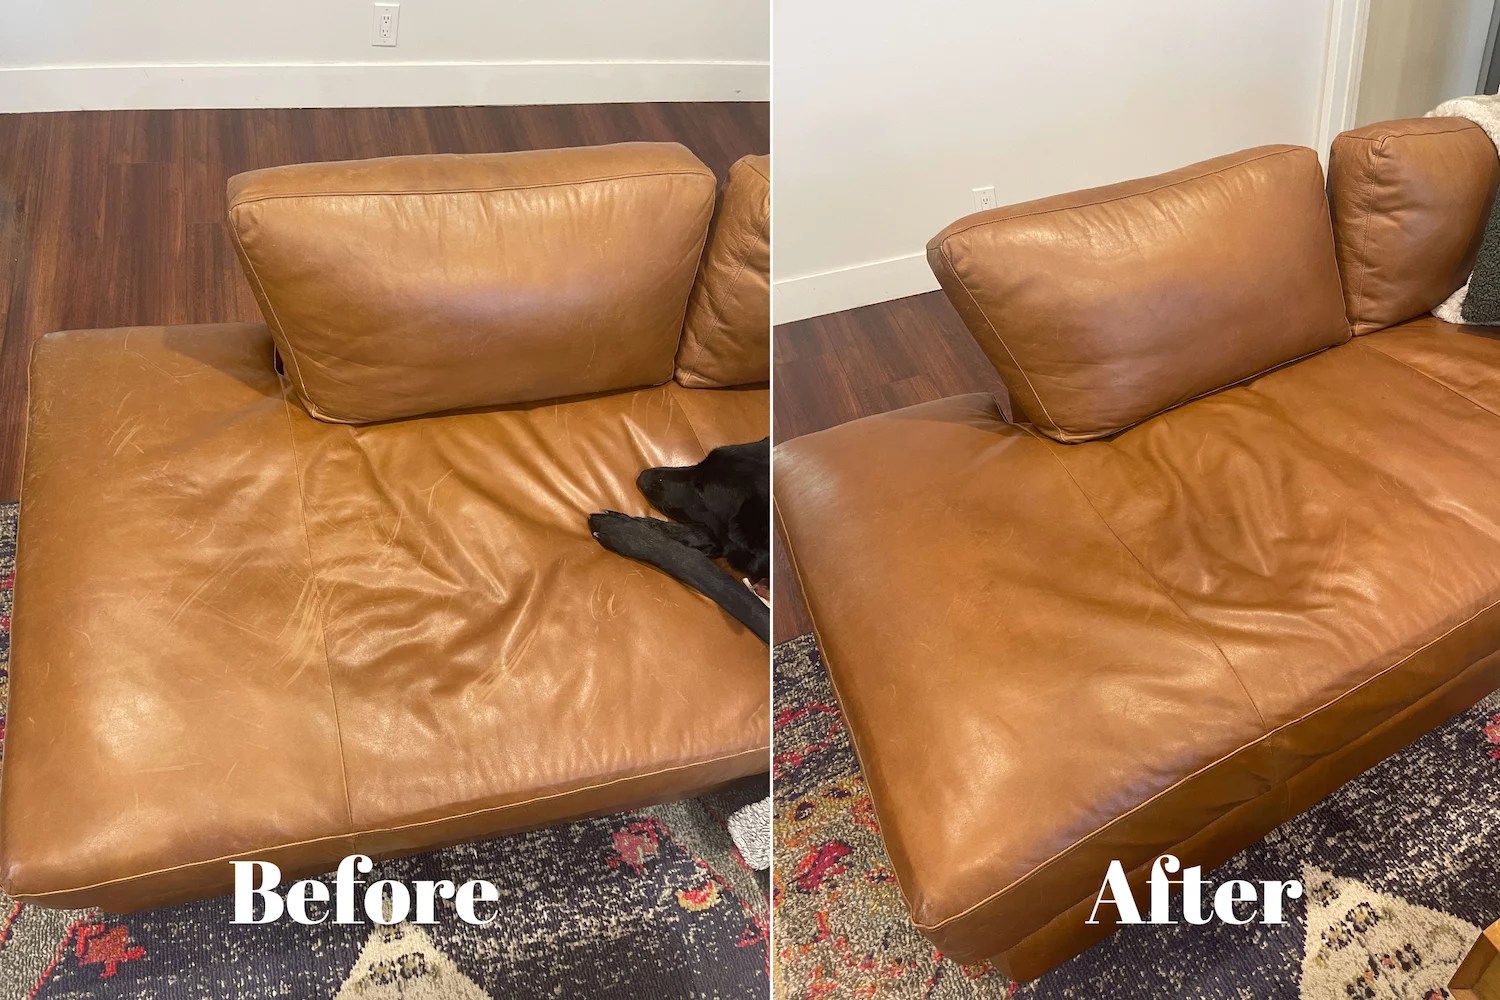 How are Clyde's Leather Products?: Using Clyde's Recoloring Balm and Leather  Protection Cream! 